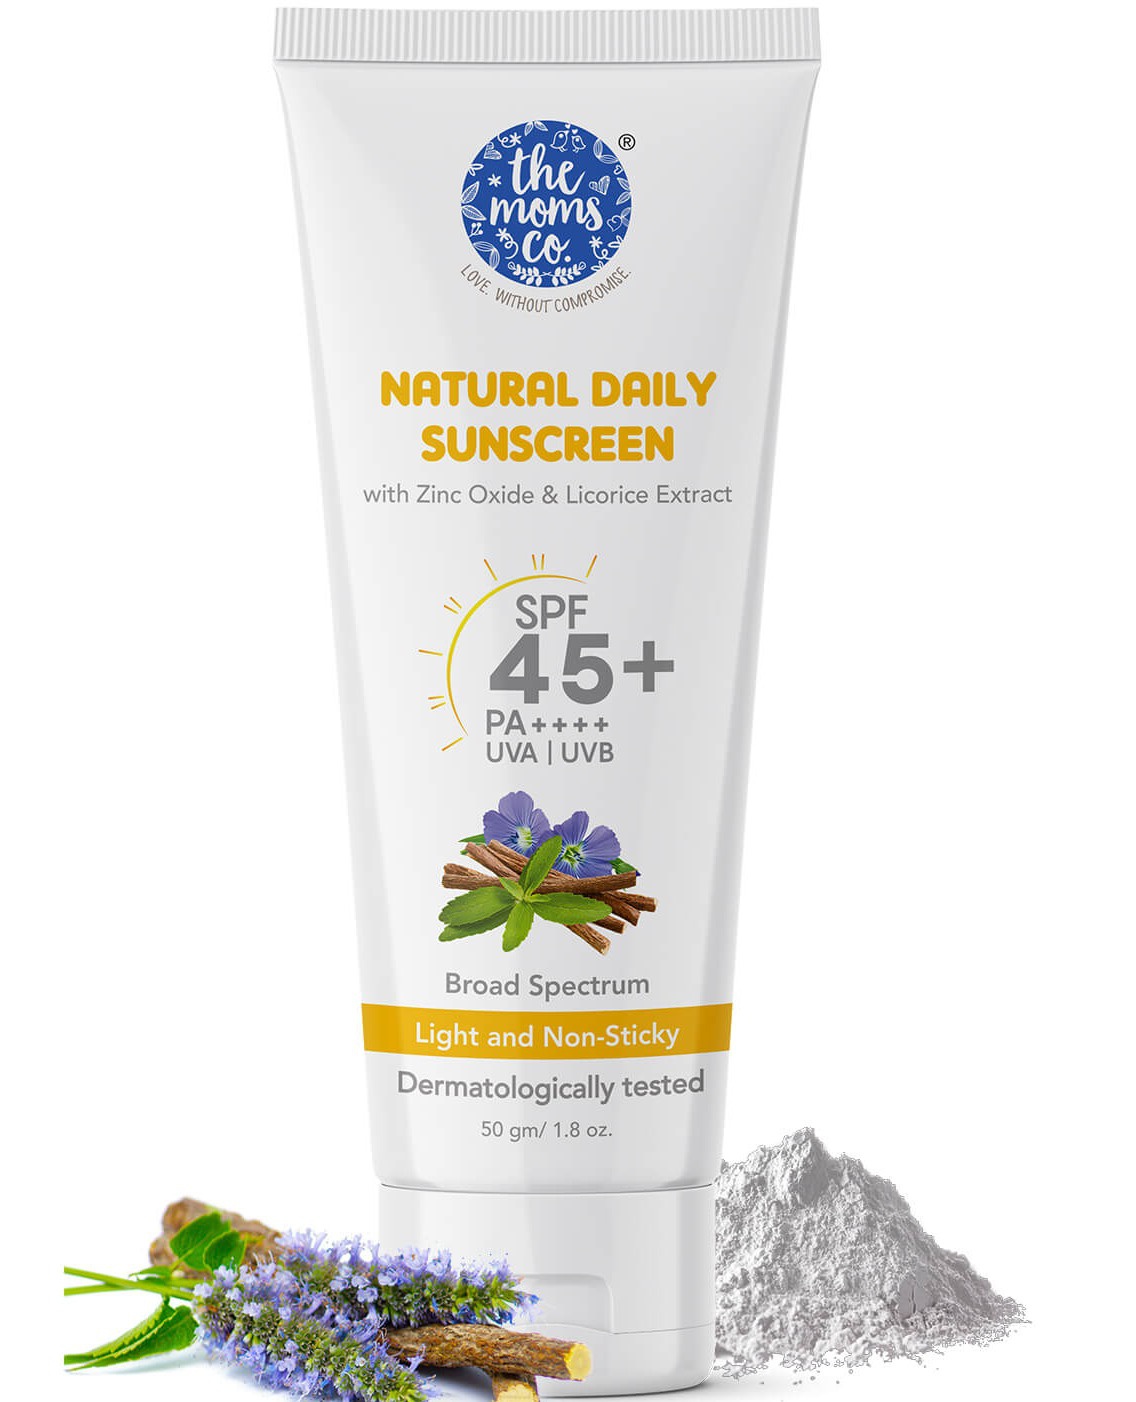 The Mom's Co. Natural Daily Mineral Sunscreen ingredients (Explained)